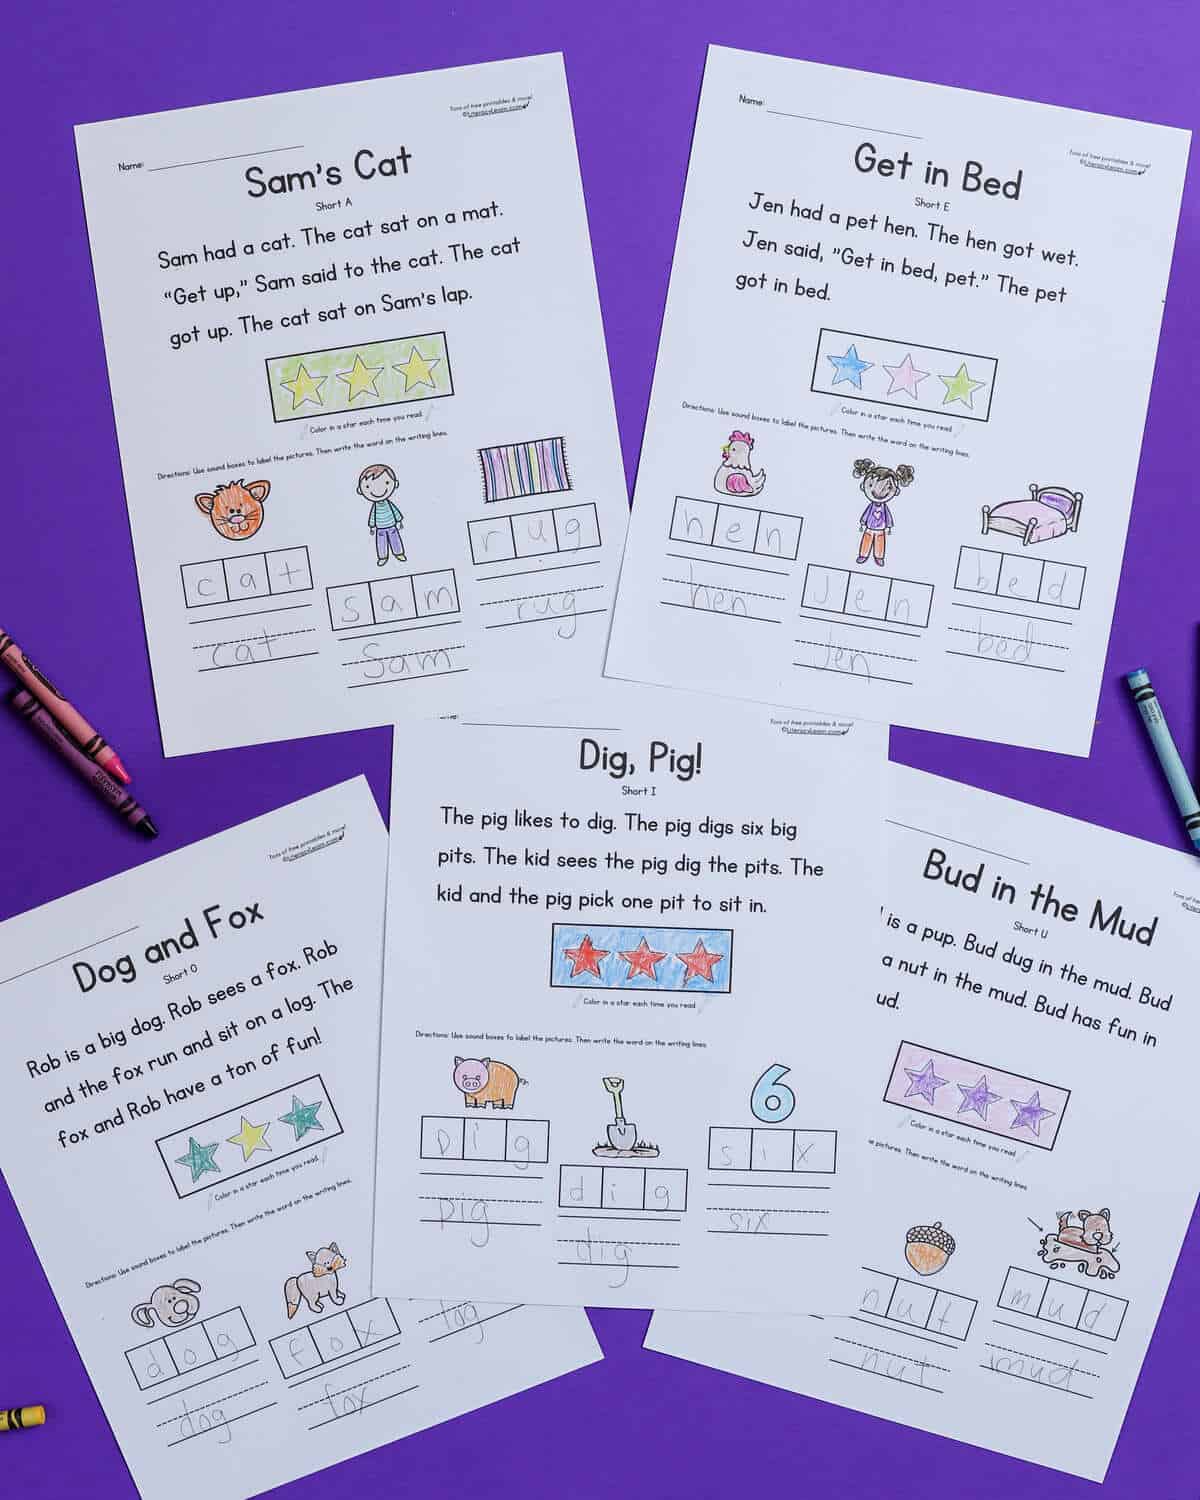 Five printed and completed CVC word decodable story worksheets on a purple background.